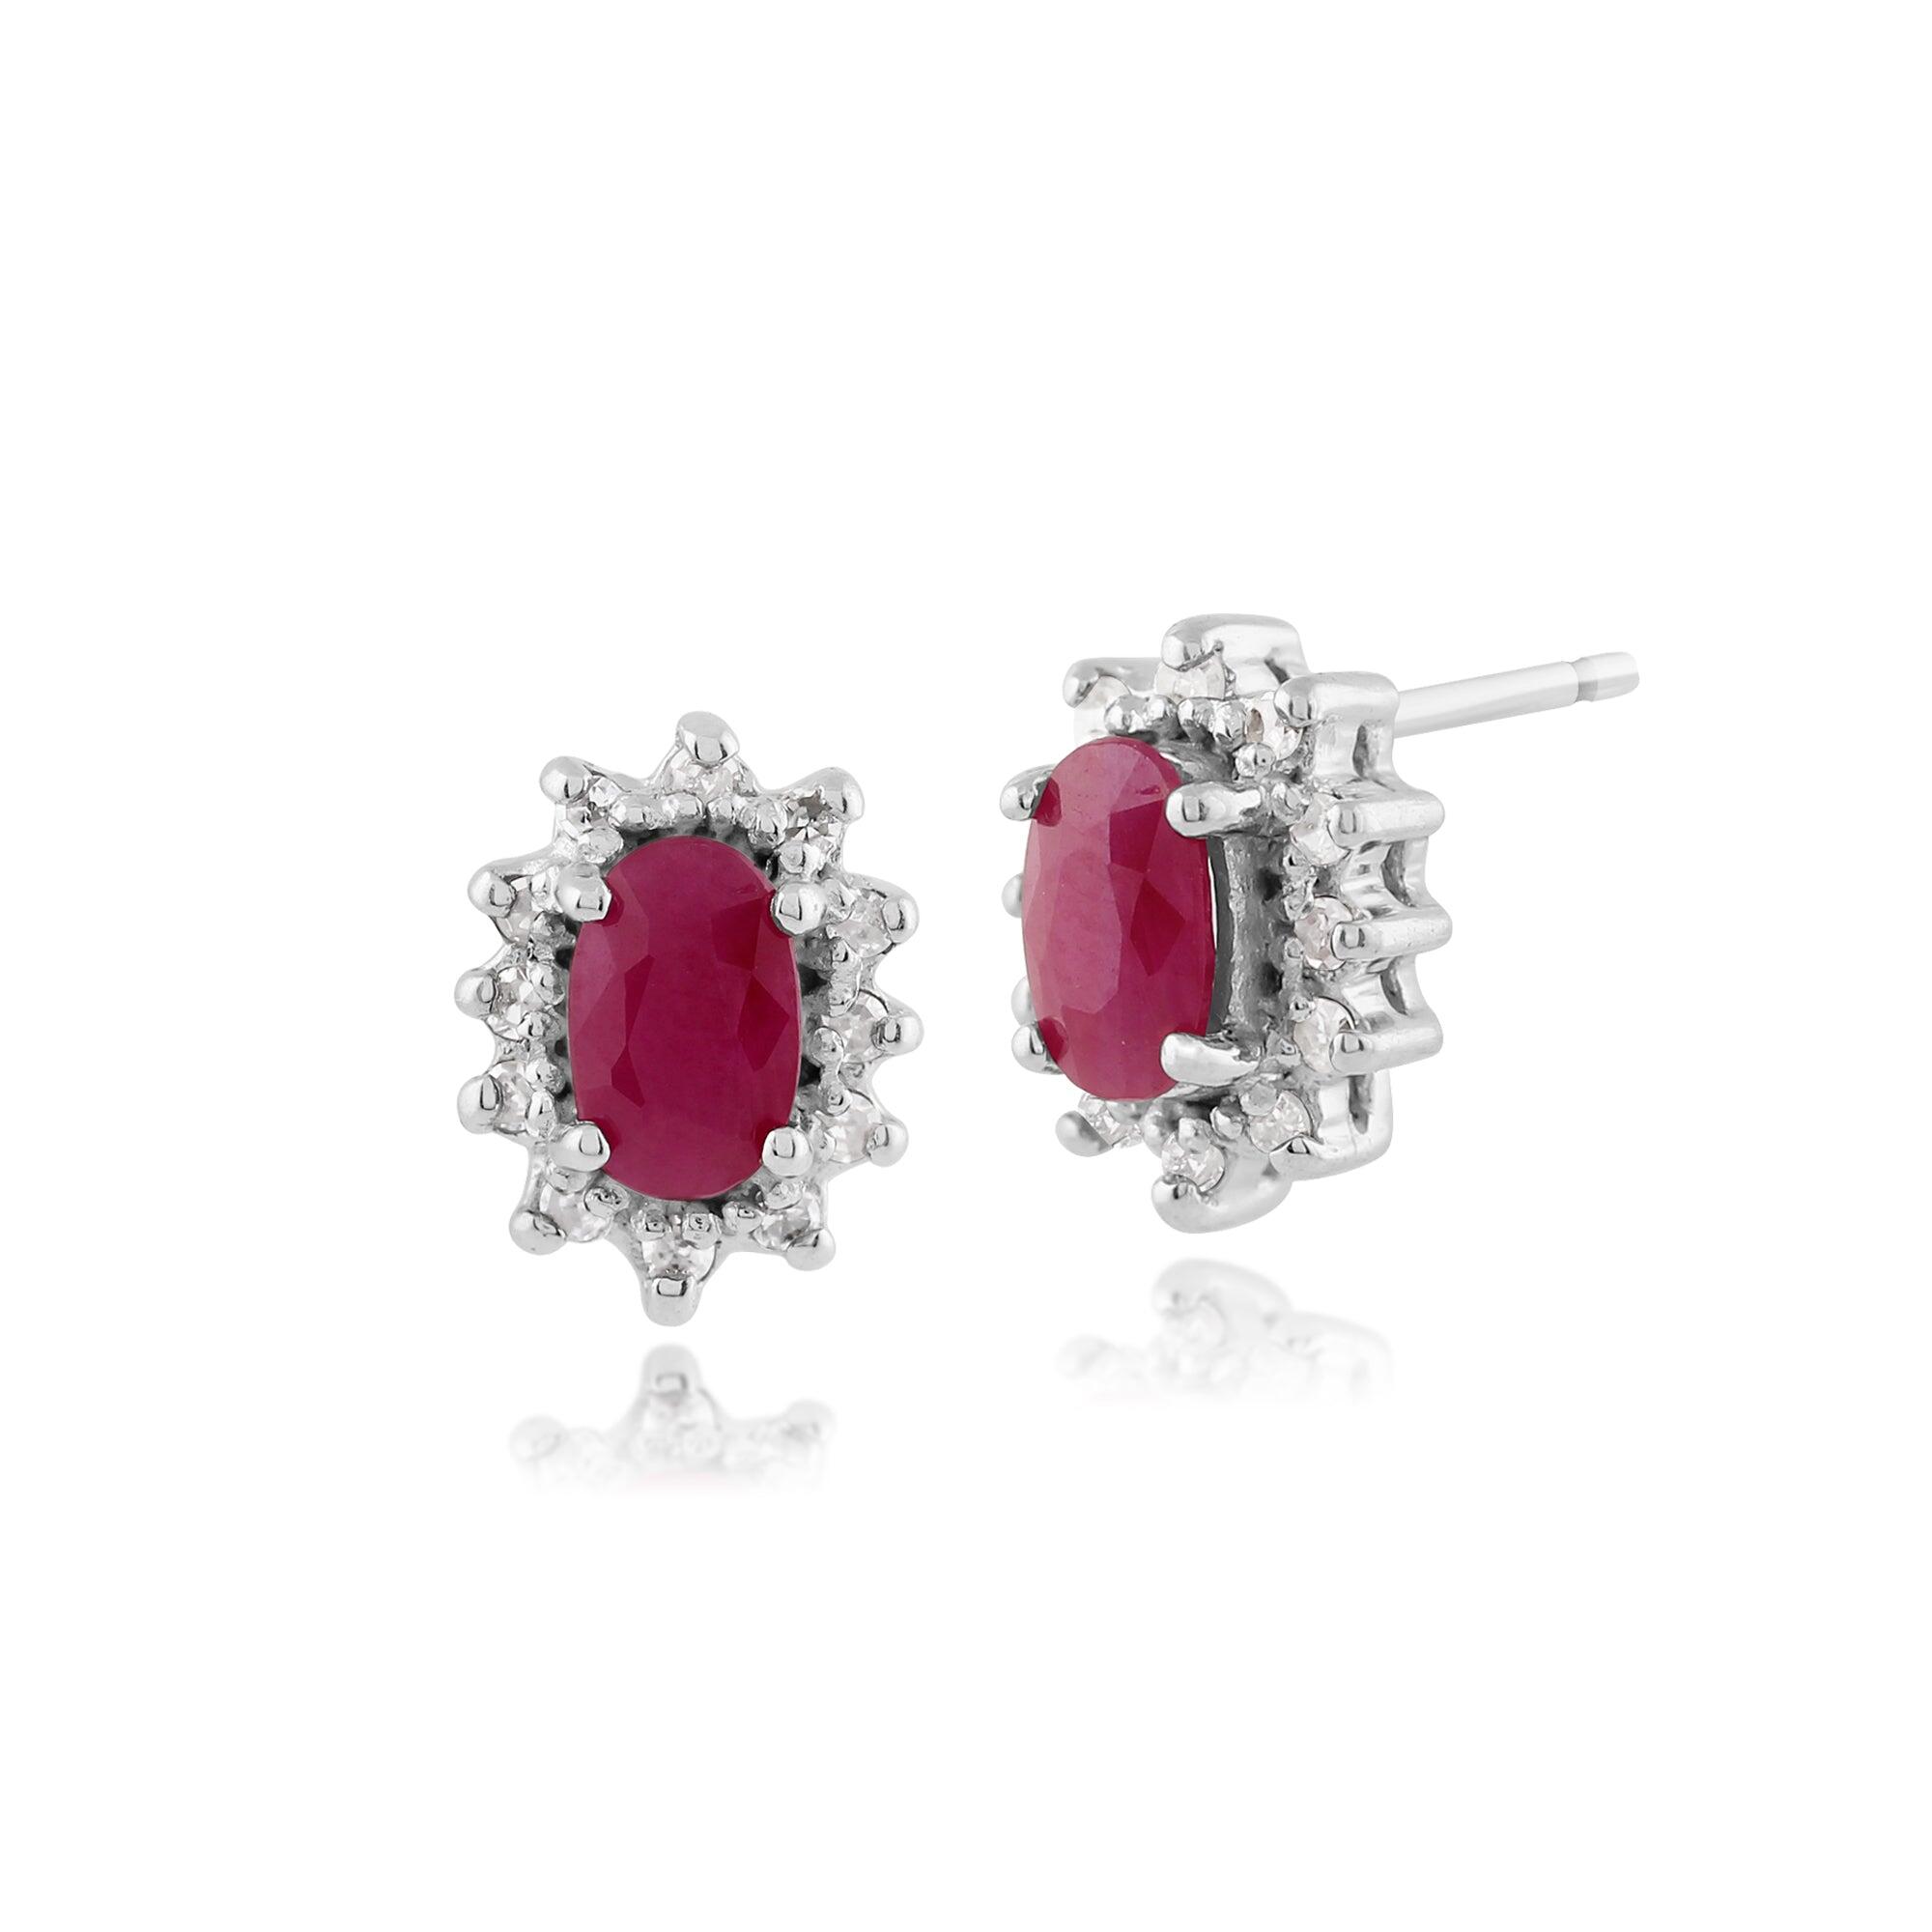 Classic Oval Ruby & Diamond Cluster Stud Earrings in 9ct White Gold 5x3mm